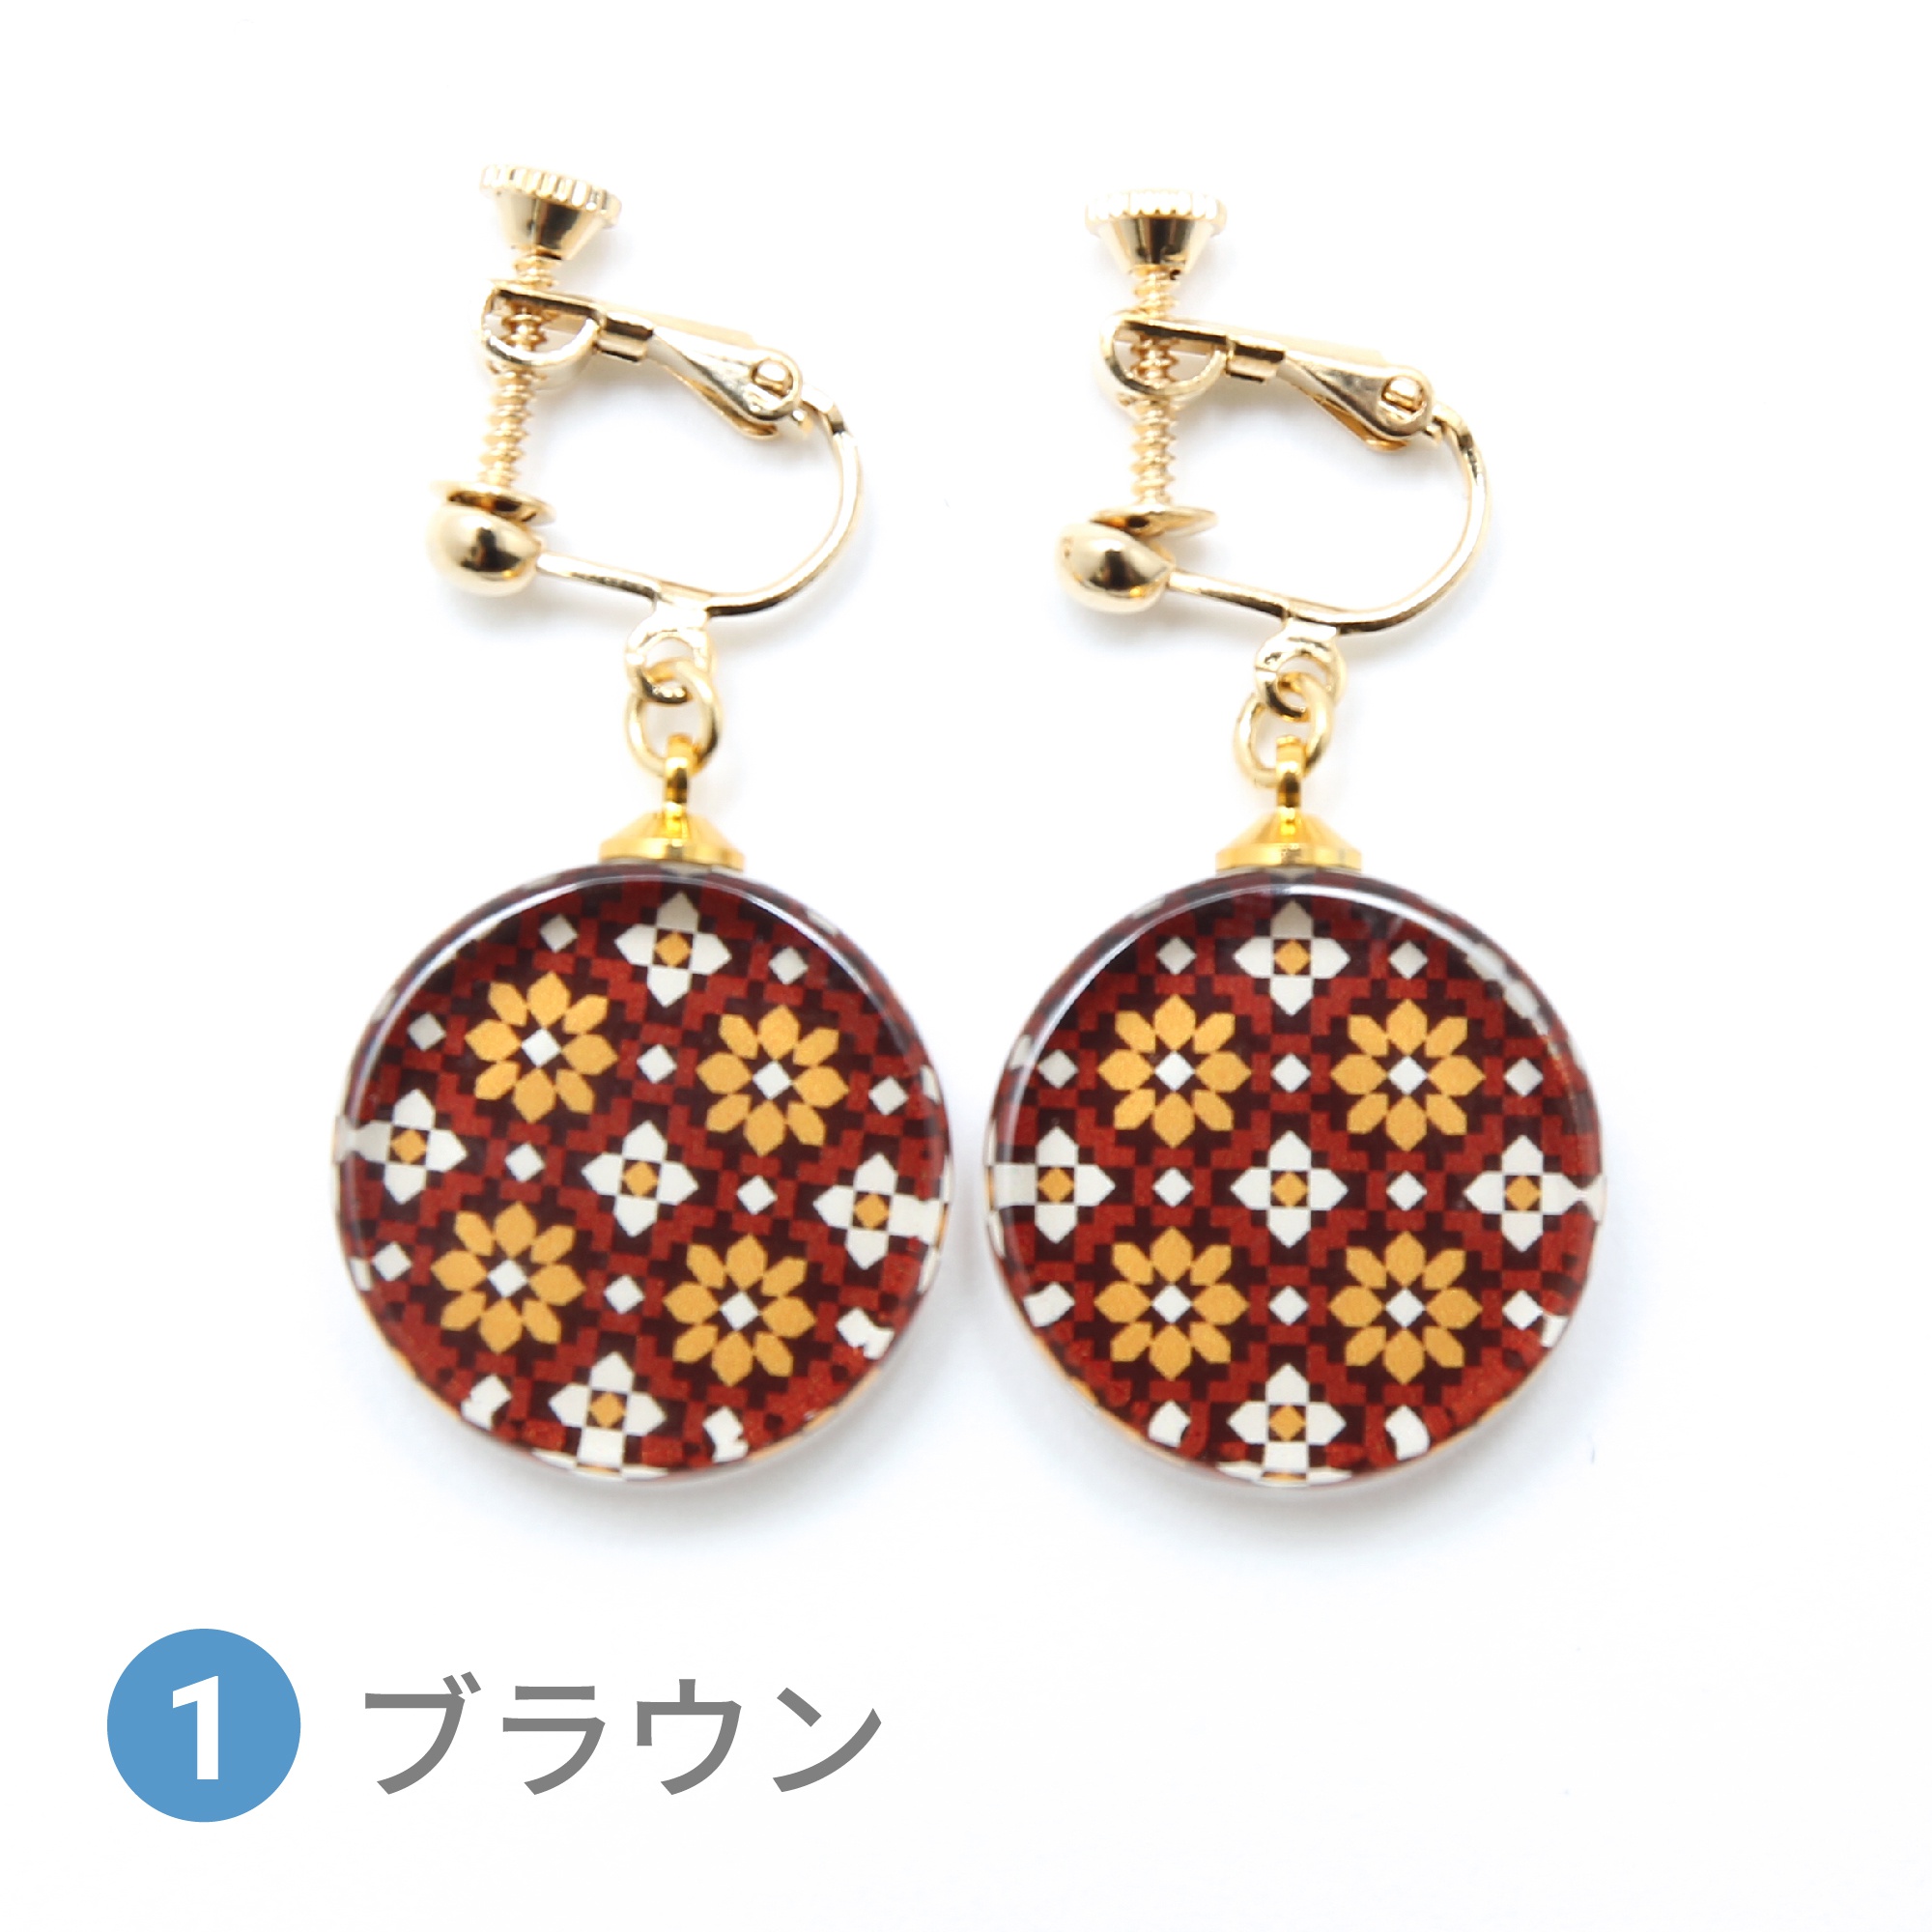 Glass accessories Earring ARABESQUE brown round shape